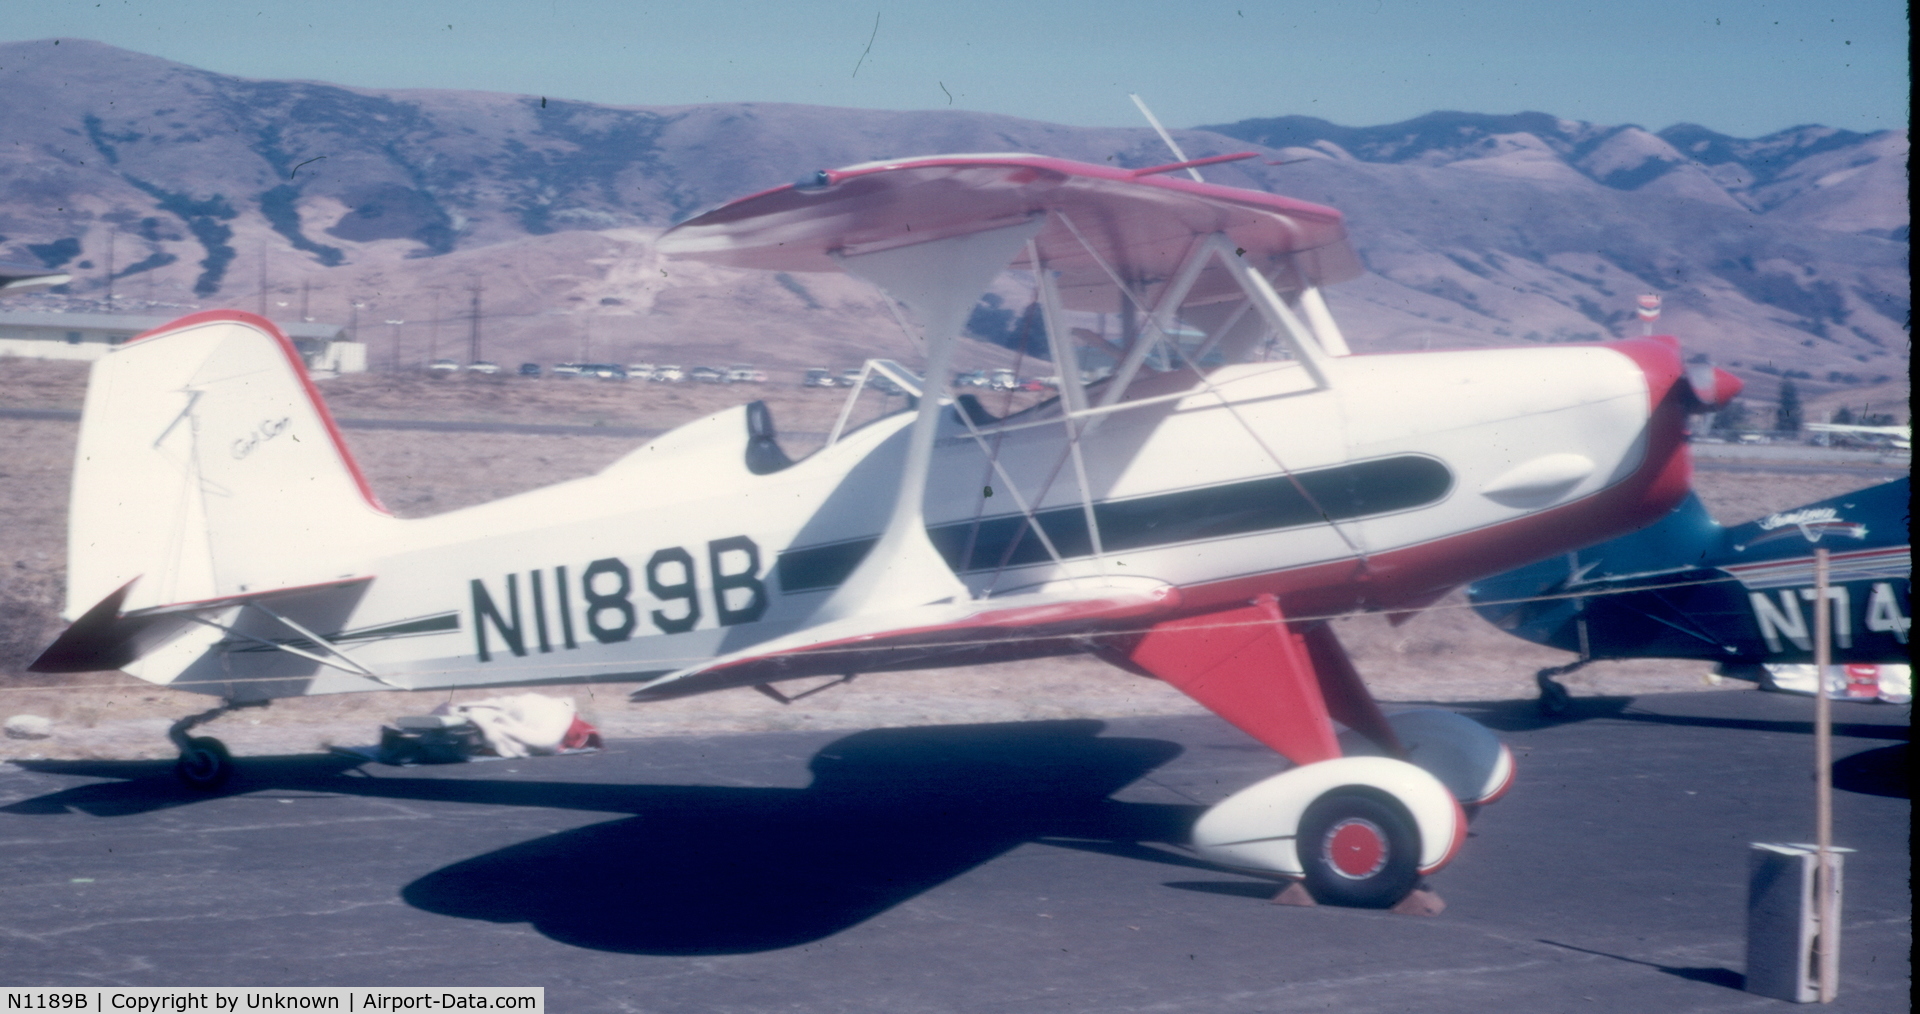 N1189B, 1969 Stolp SA-300 Starduster Too C/N 89, Found in magazine of slide projector purchased at the Ridgecrest CA Salvation Arny thrift store